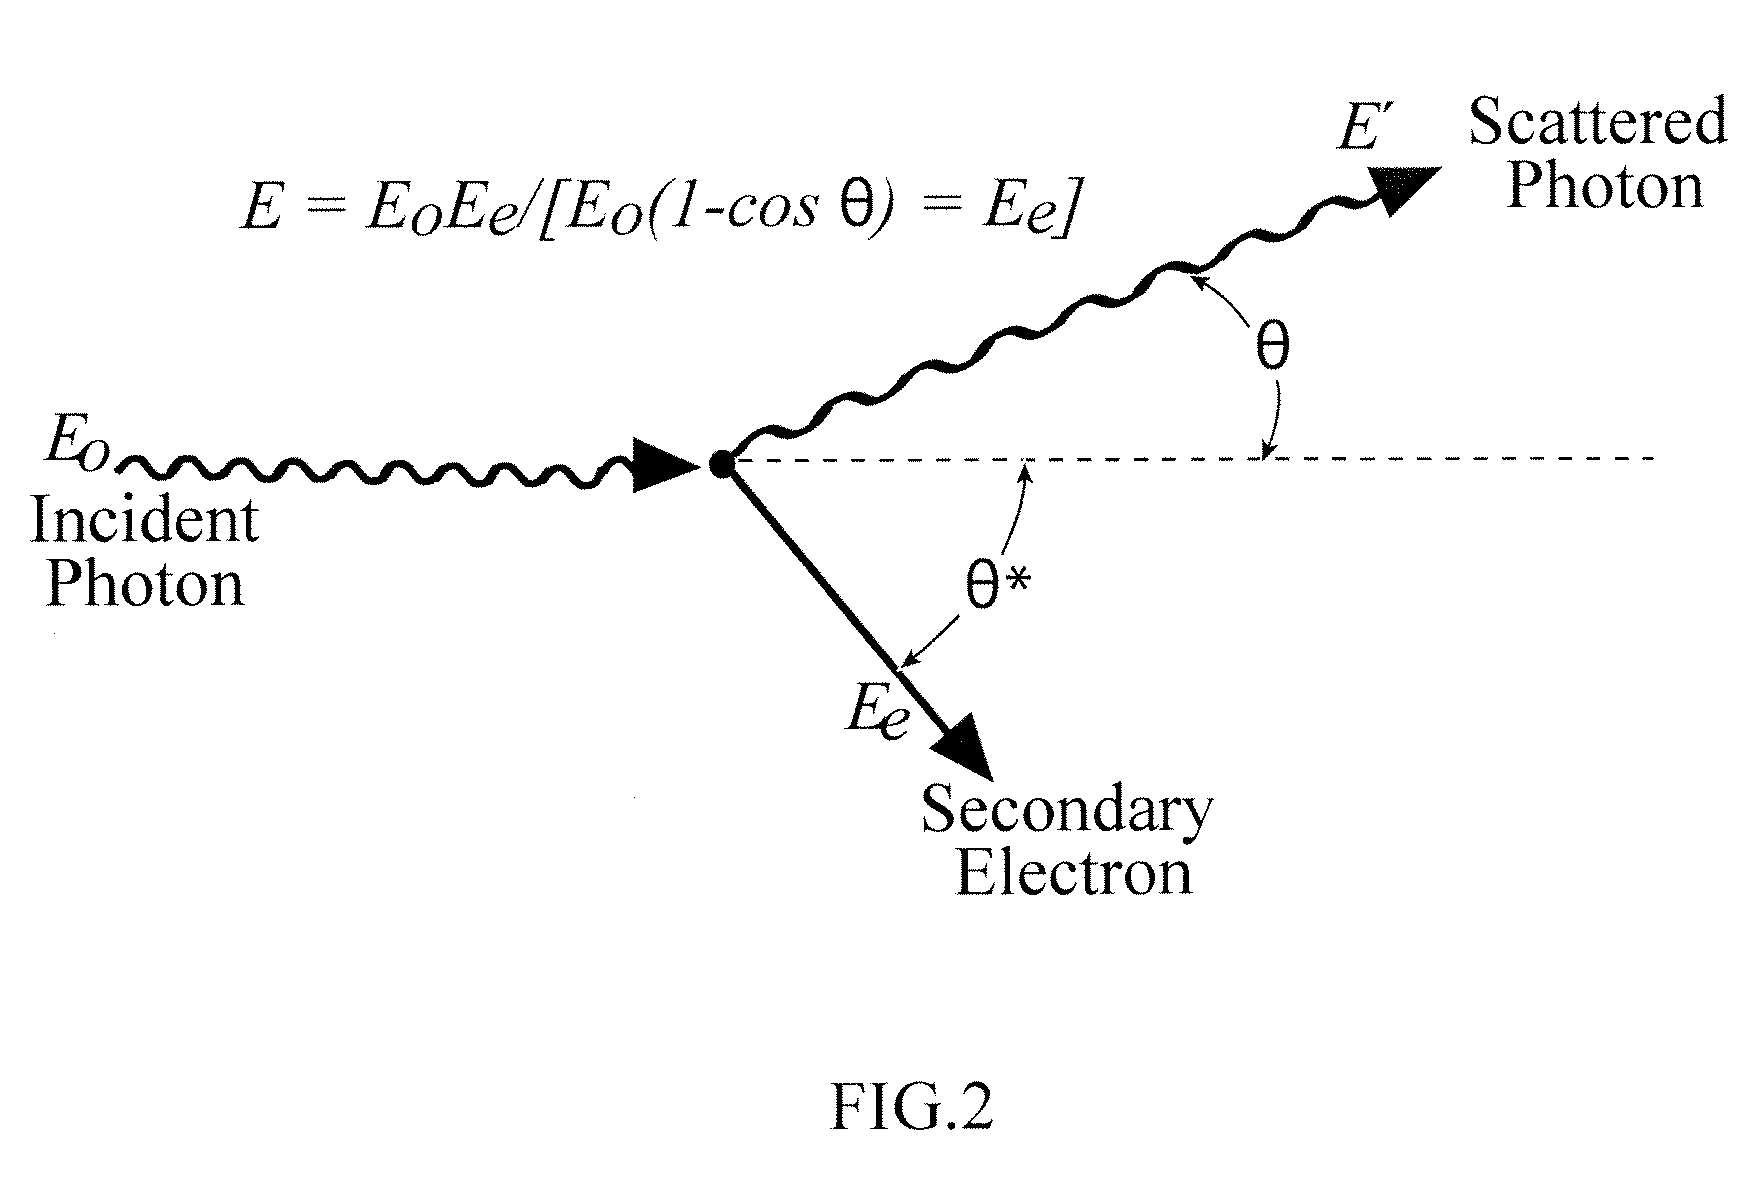 Stationary inspection system for three-dimensional imaging employing electronic modulation of spectral data from compton-scattered gammas